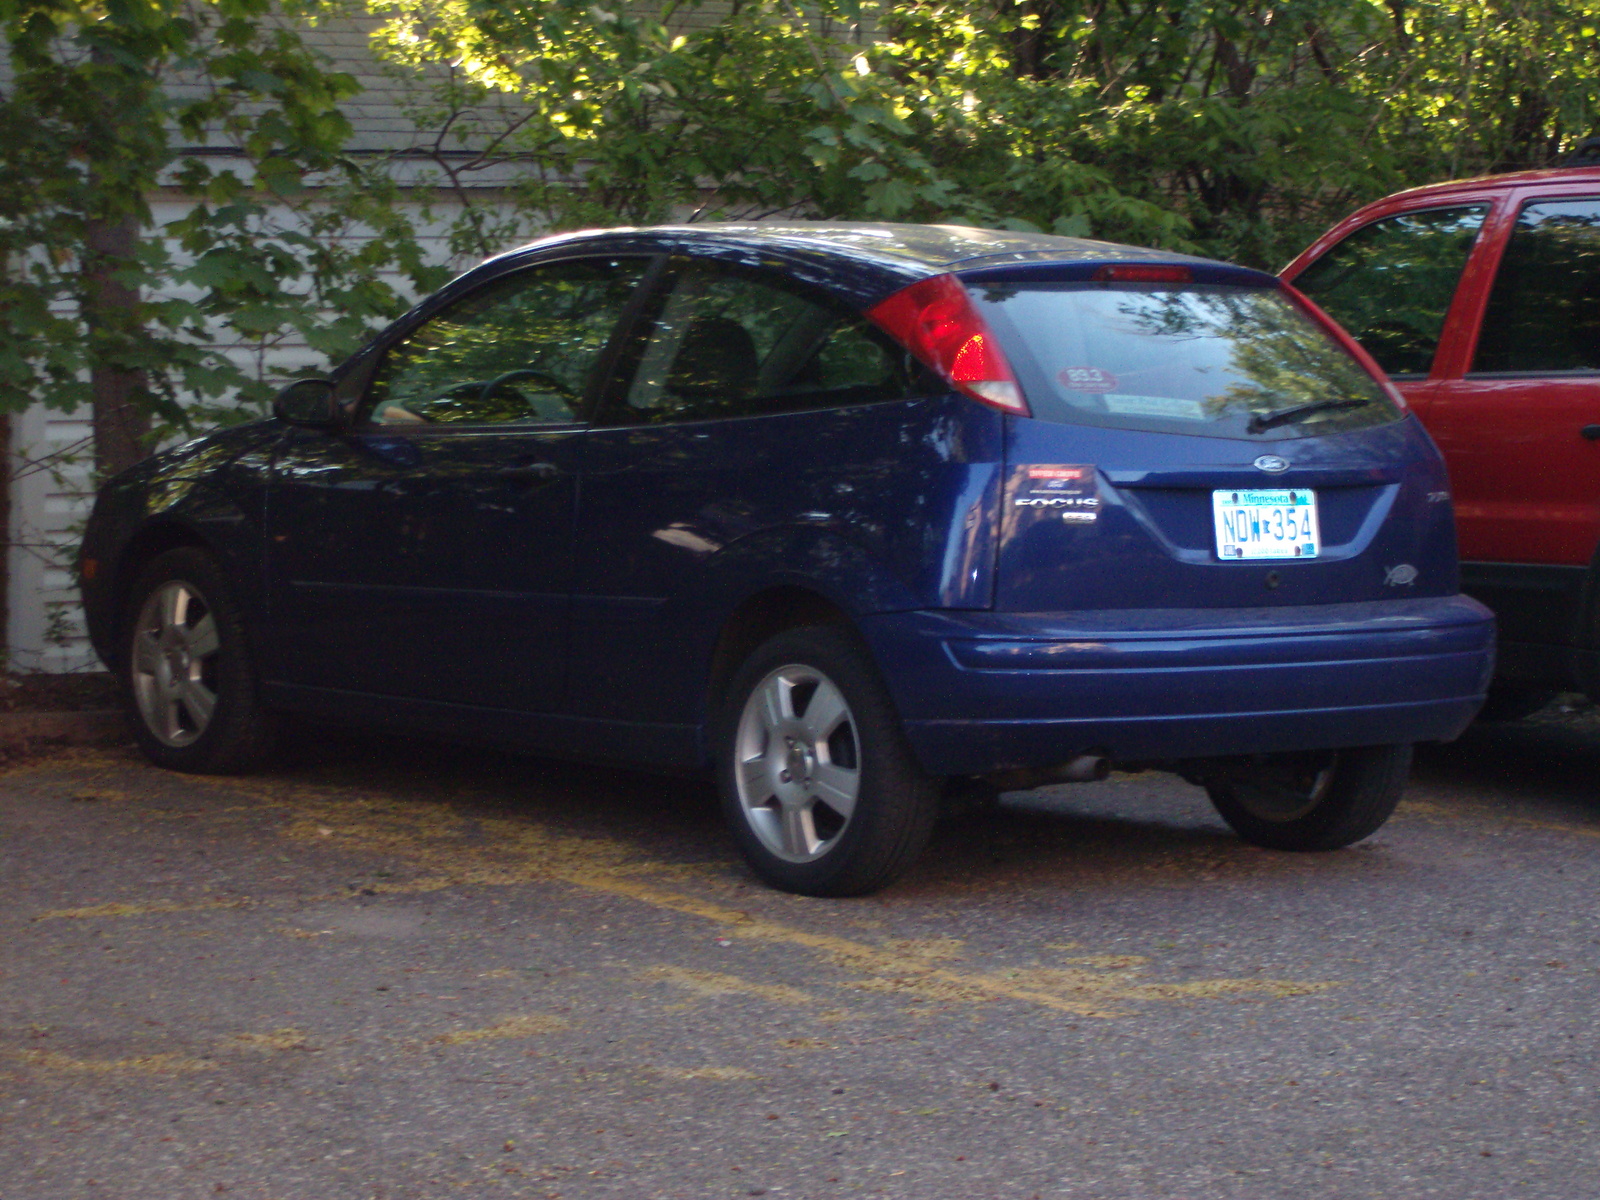 2005 Ford focus zx5 reliability msn #4